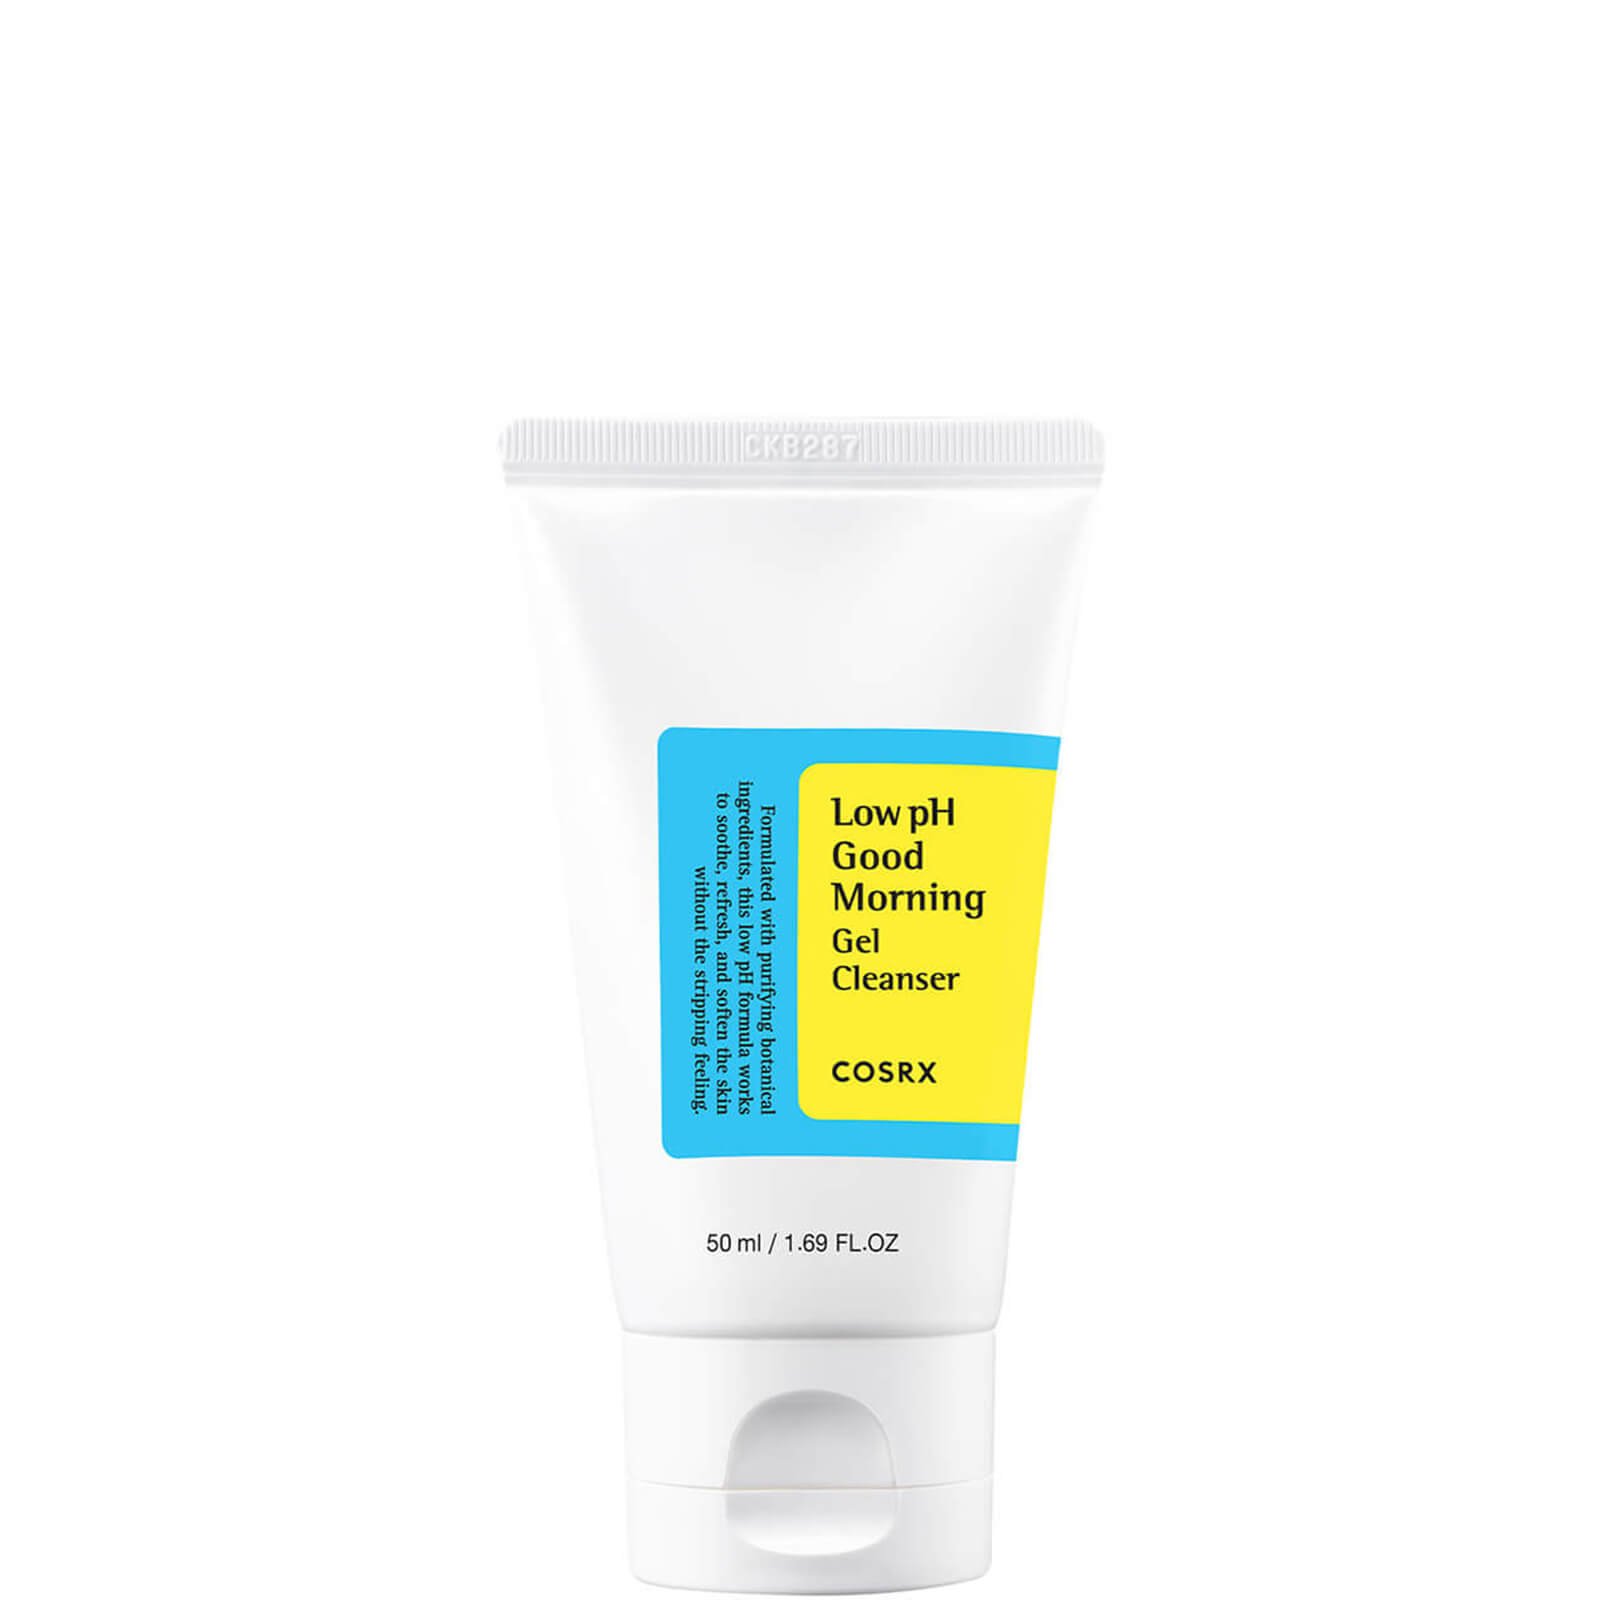 Image of COSRX Low pH Good Morning Gel Cleanser 50ml